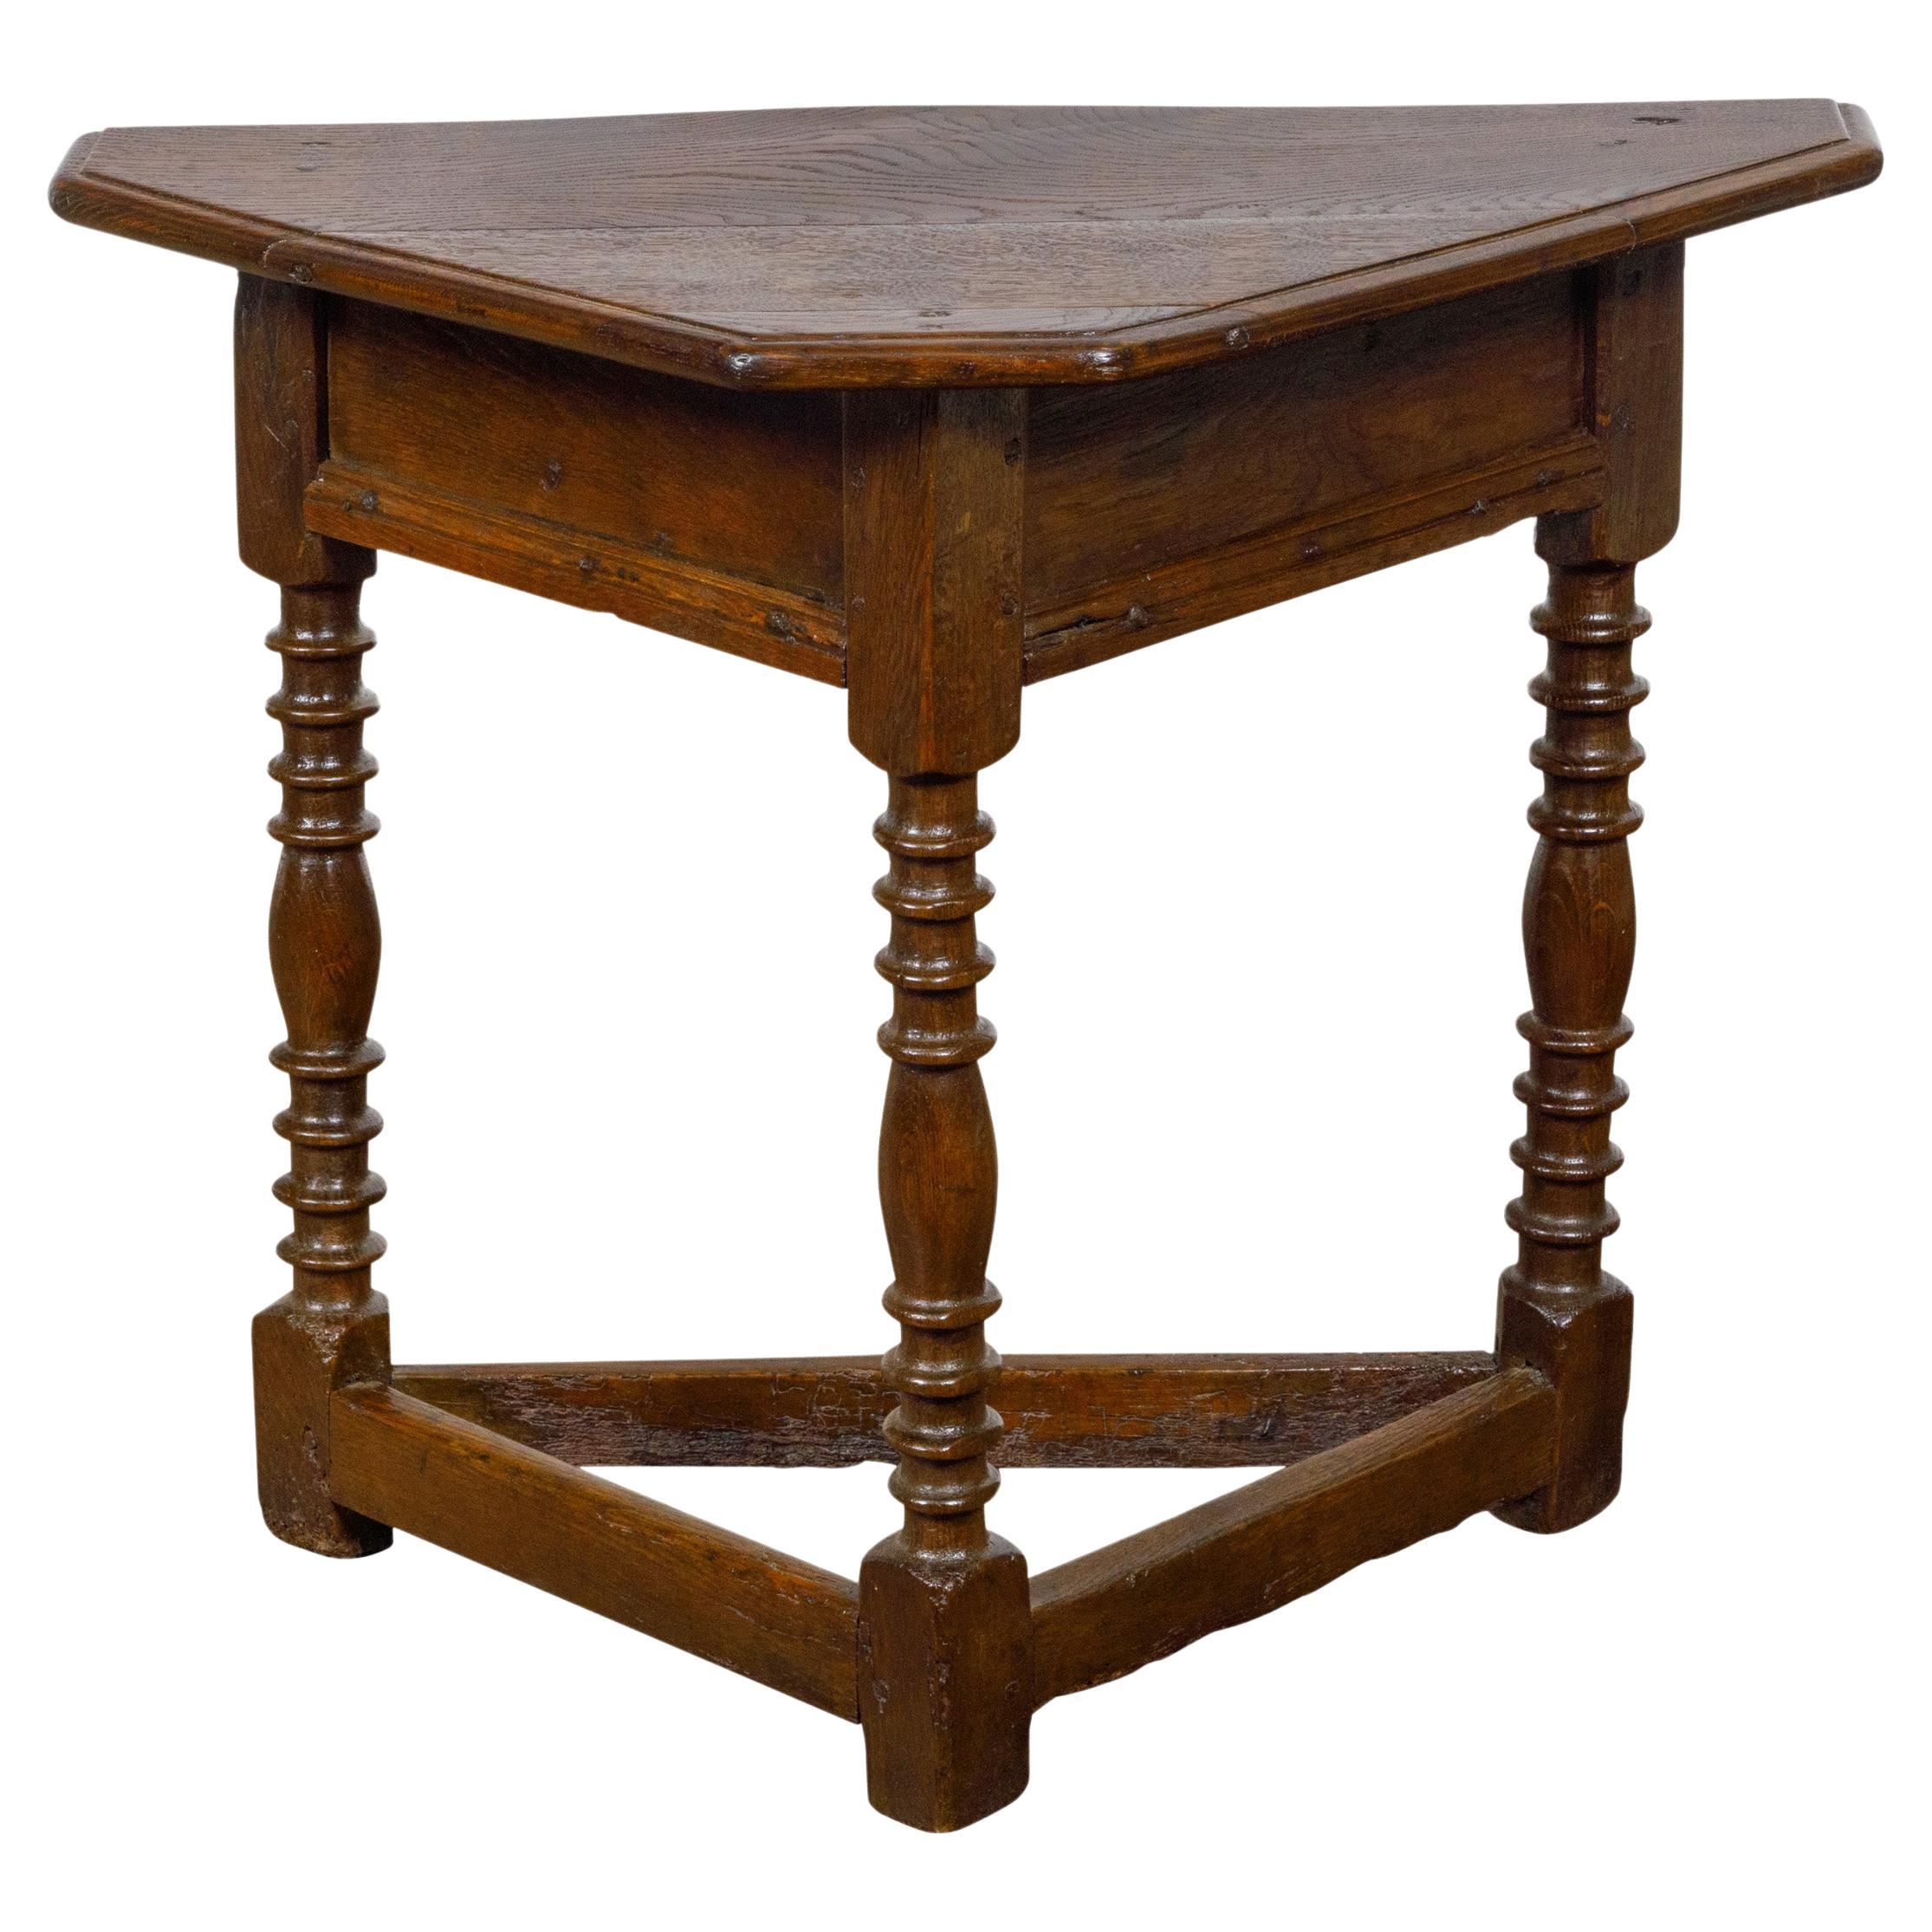 English 19th Century Dark Oak Triangular Demilune Table with Turned Legs For Sale